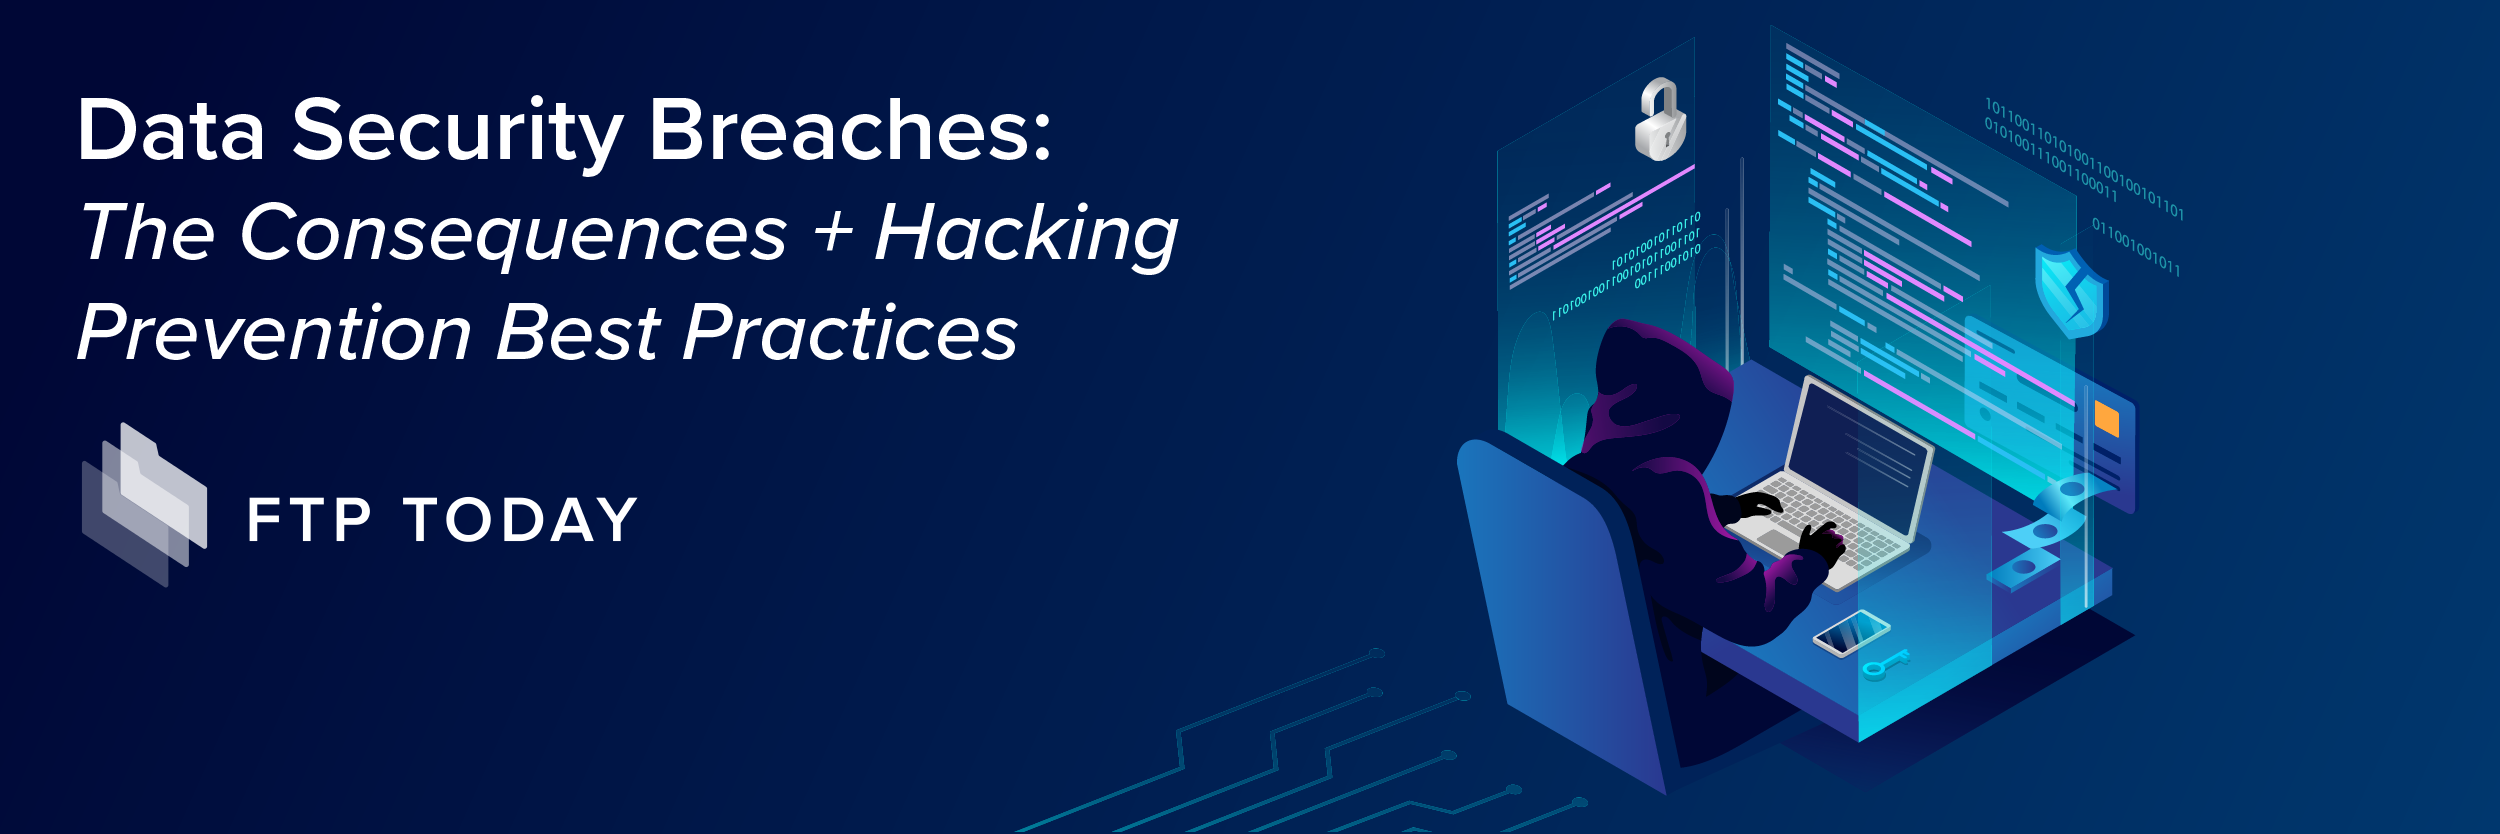 Data Security Breaches: The Consequences + Hacking Prevention Best Practices